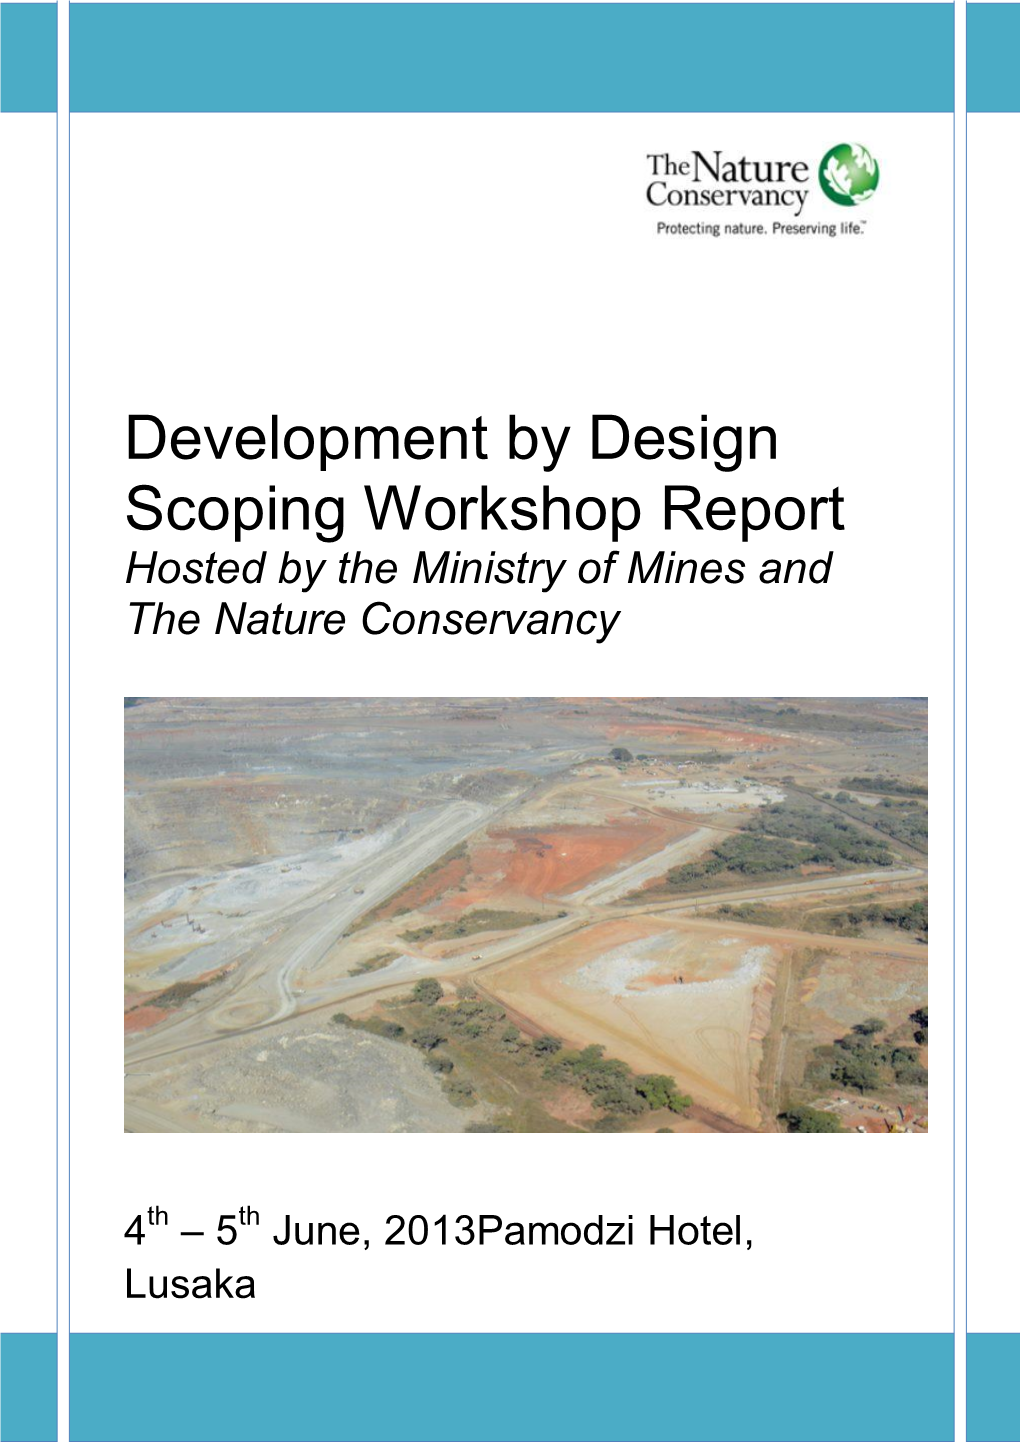 Development by Design Scoping Workshop Report Hosted by the Ministry of Mines and the Nature Conservancy